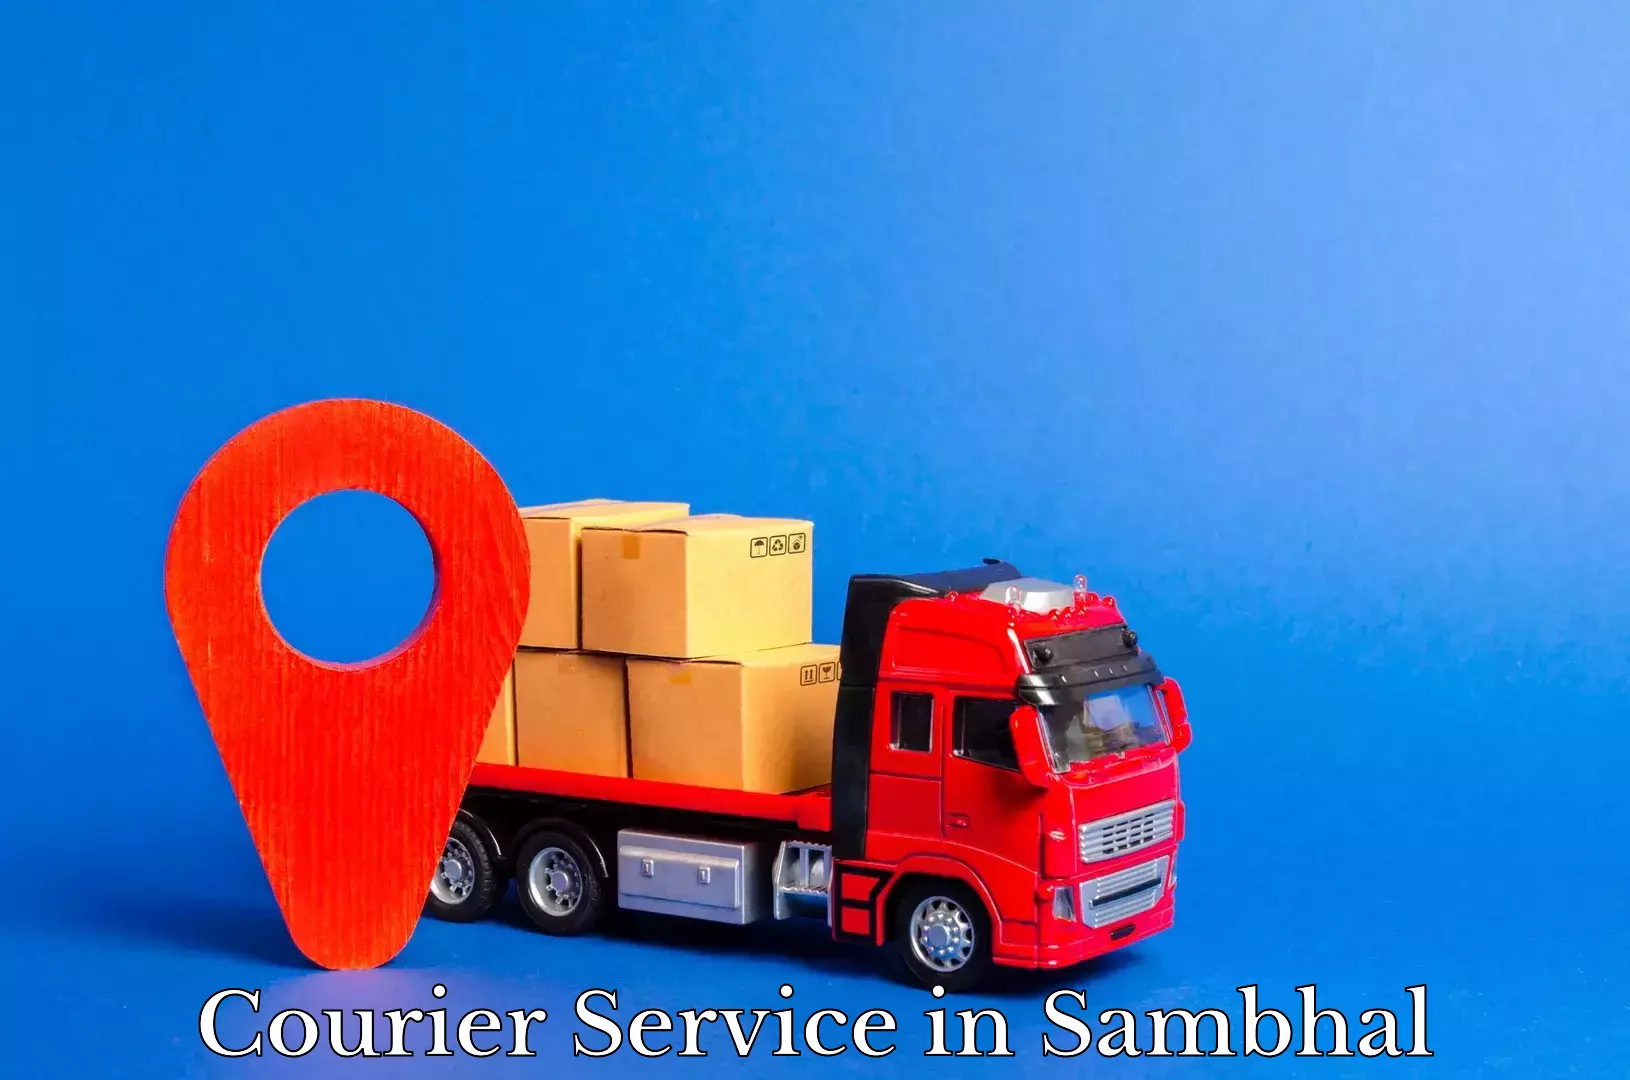 Air courier services in Sambhal